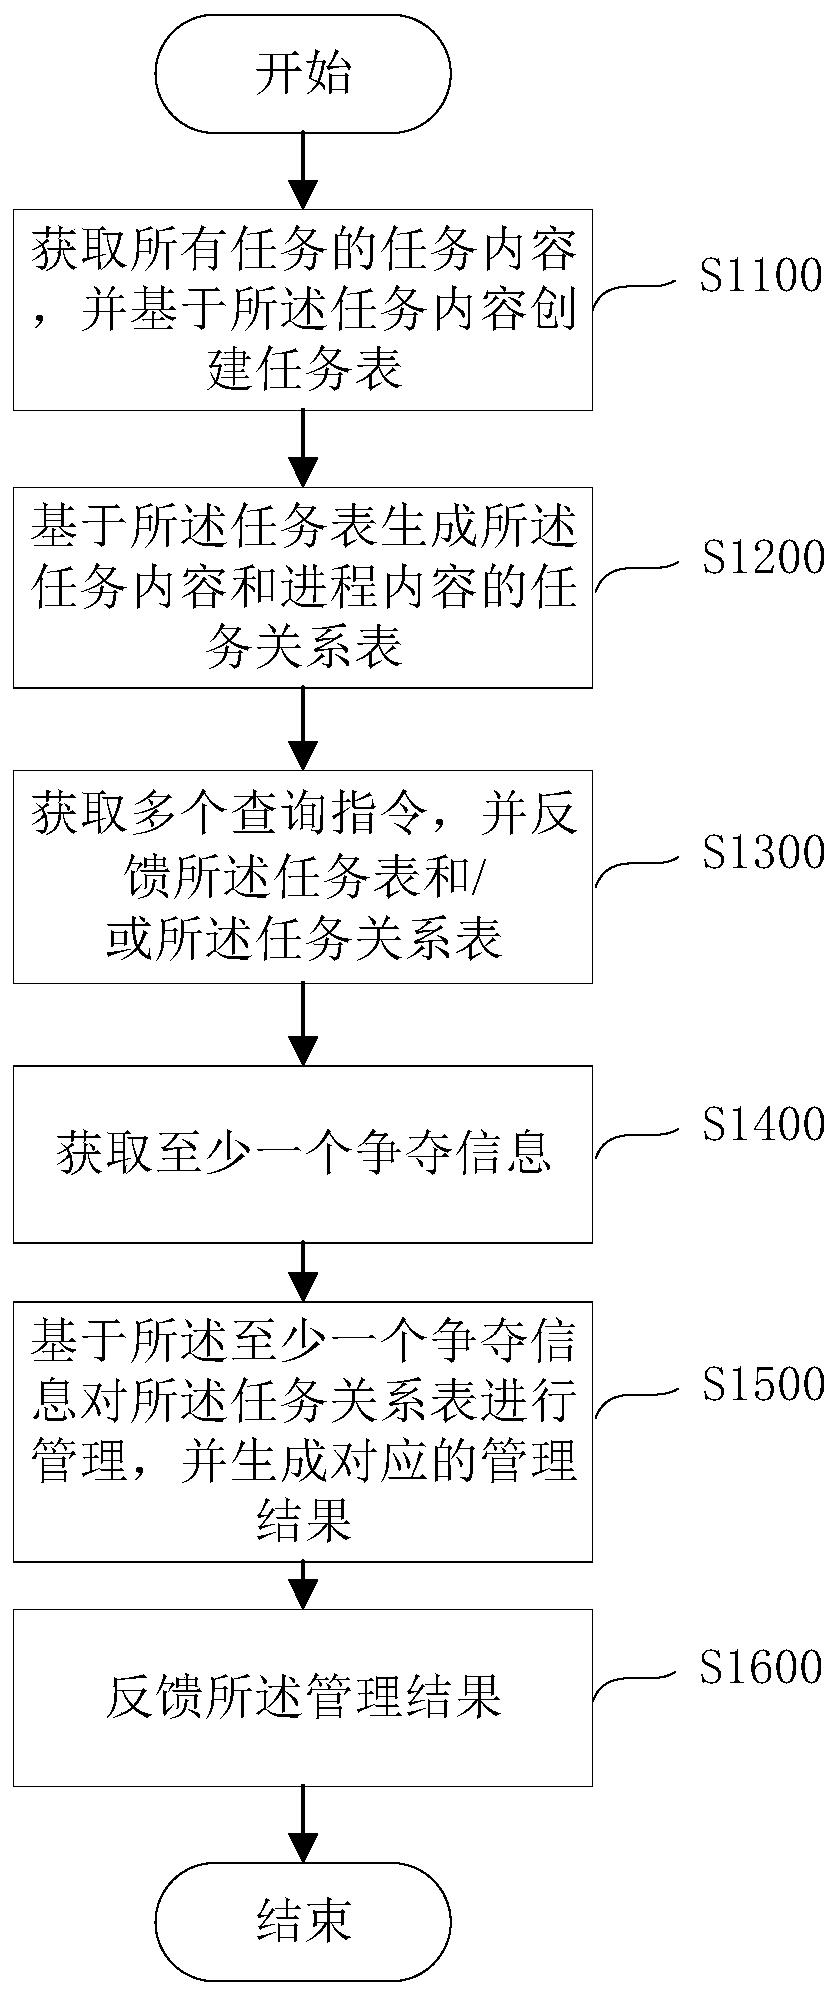 Multi-point deployment process management method and process competition method